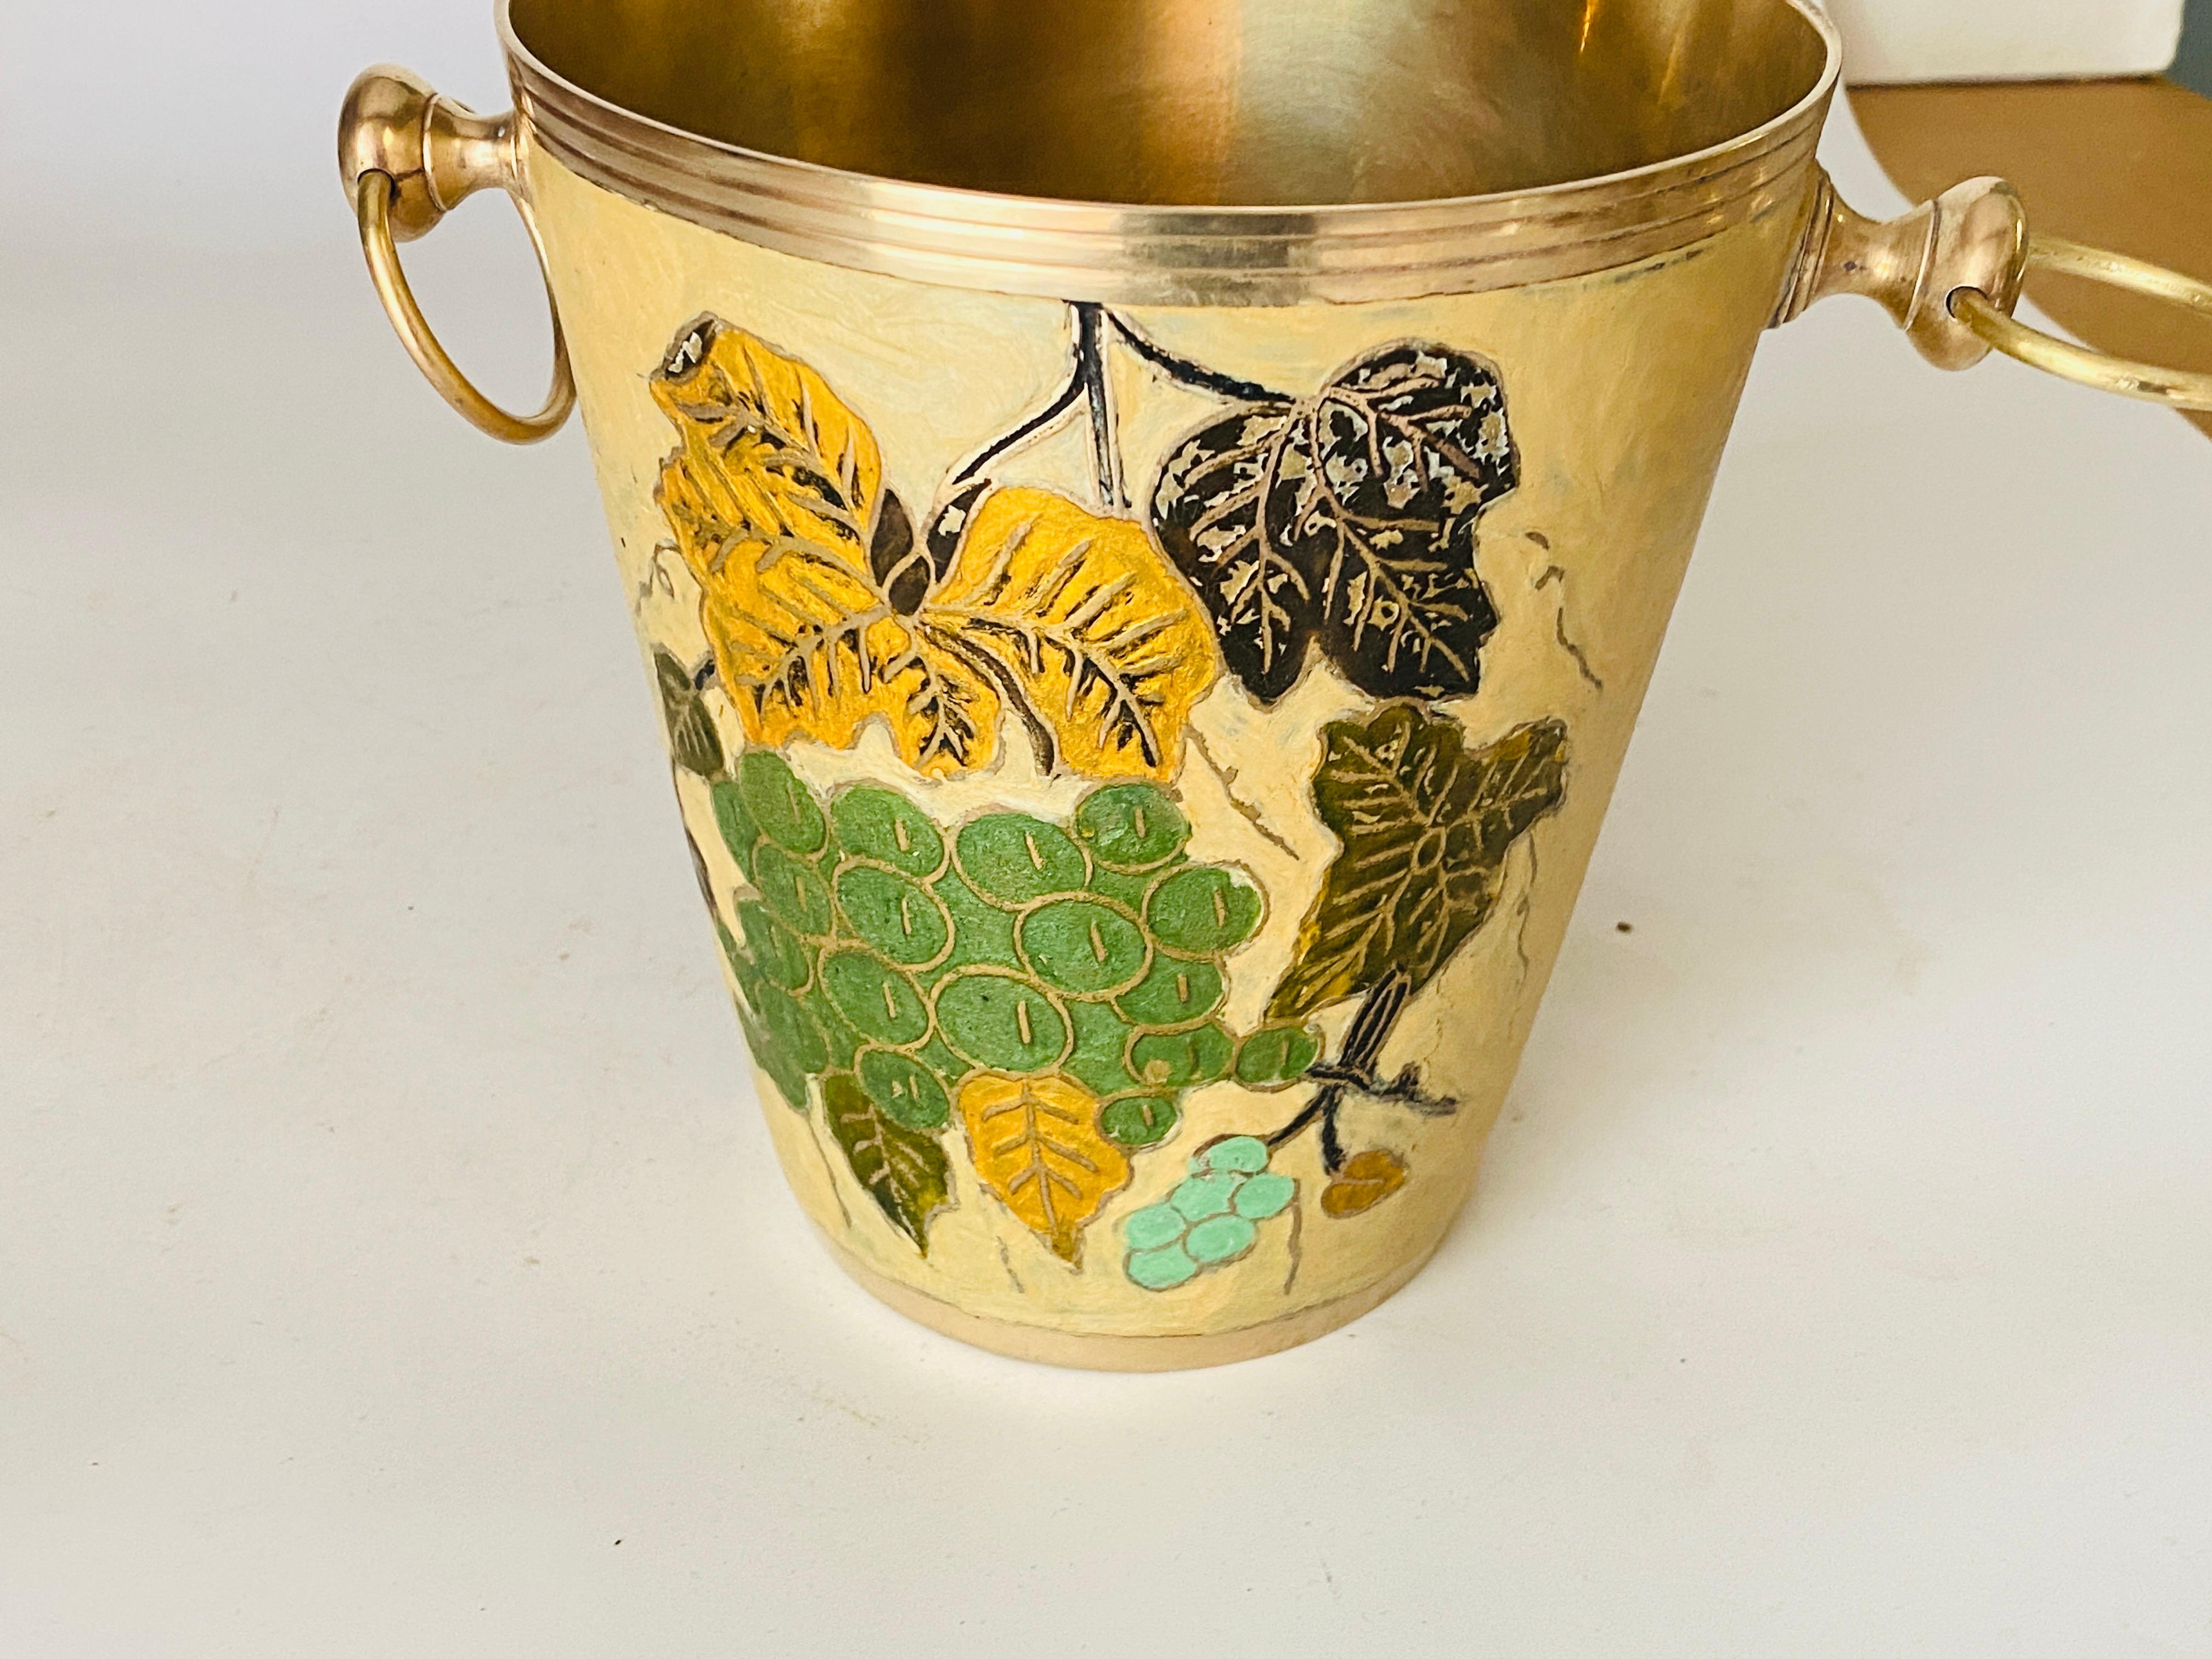 Champagne bucket with colored floral decor frame.
Champagne cooler.
Ice bucket.
Brass and hand painted ceramic cloisonné.